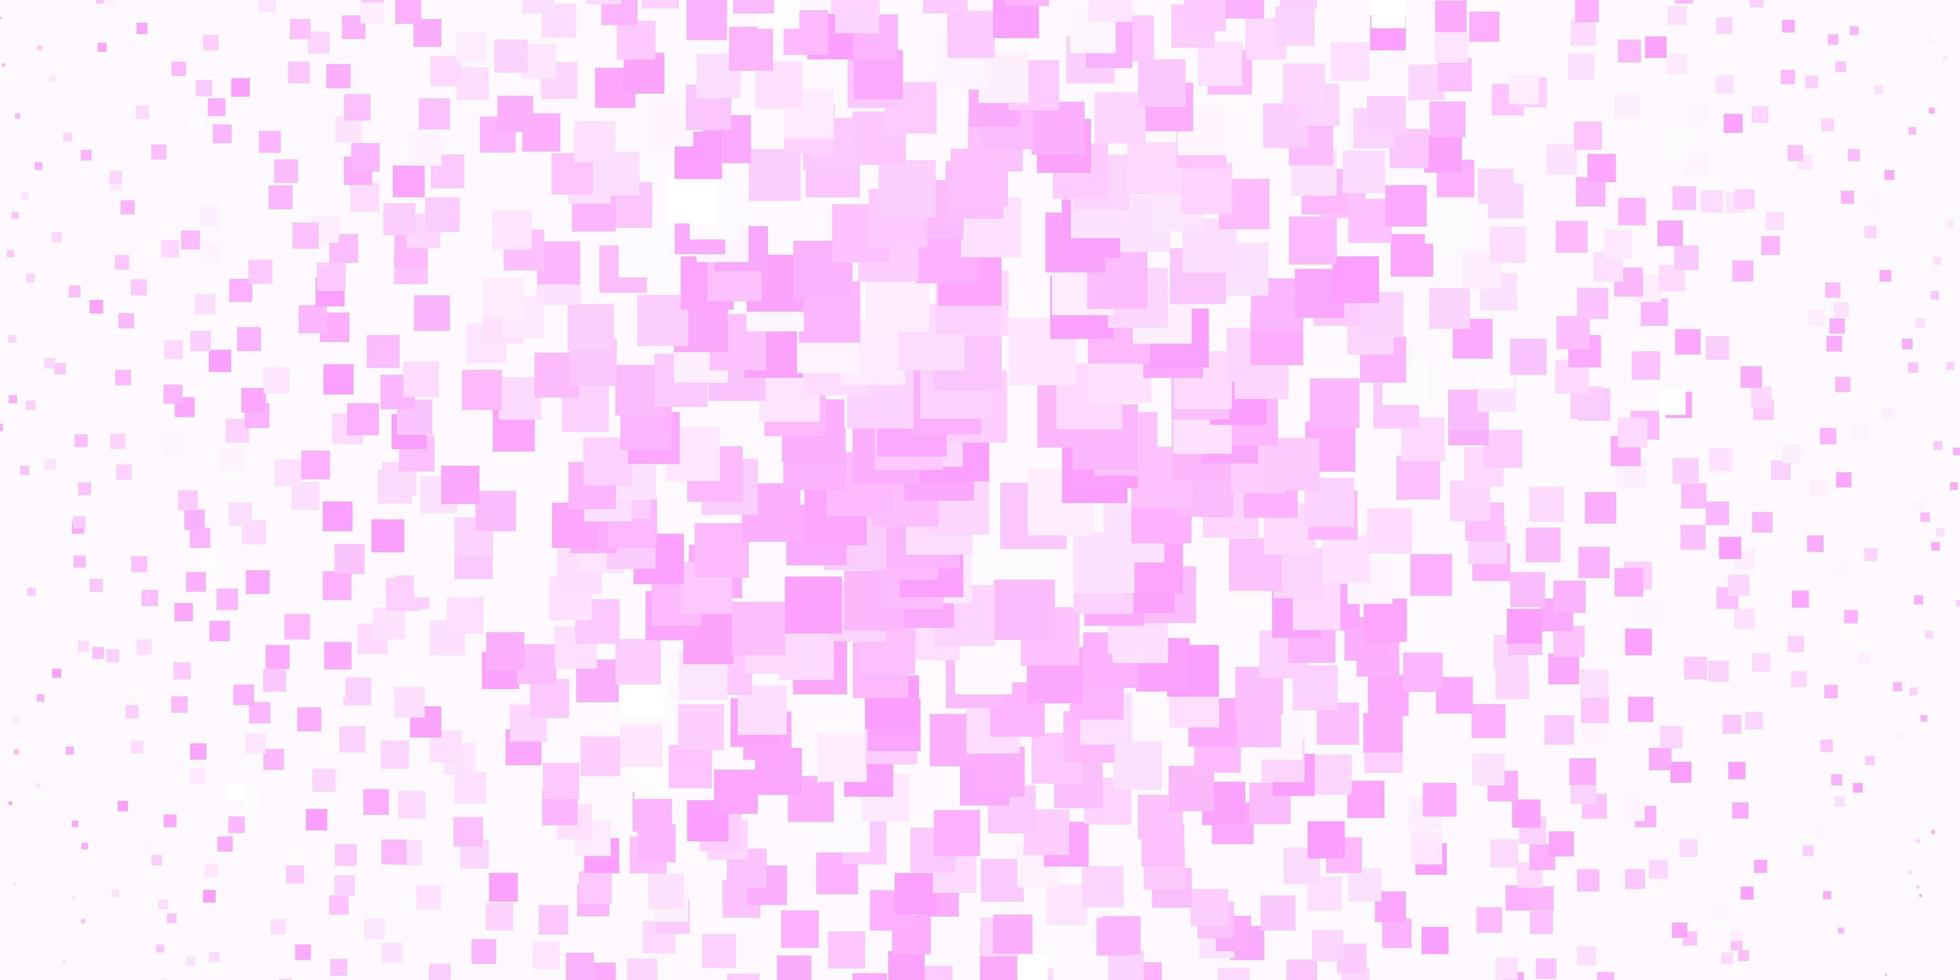 Light Pink vector pattern in square style. Abstract gradient illustration with rectangles. Best design for your ad, poster, banner.